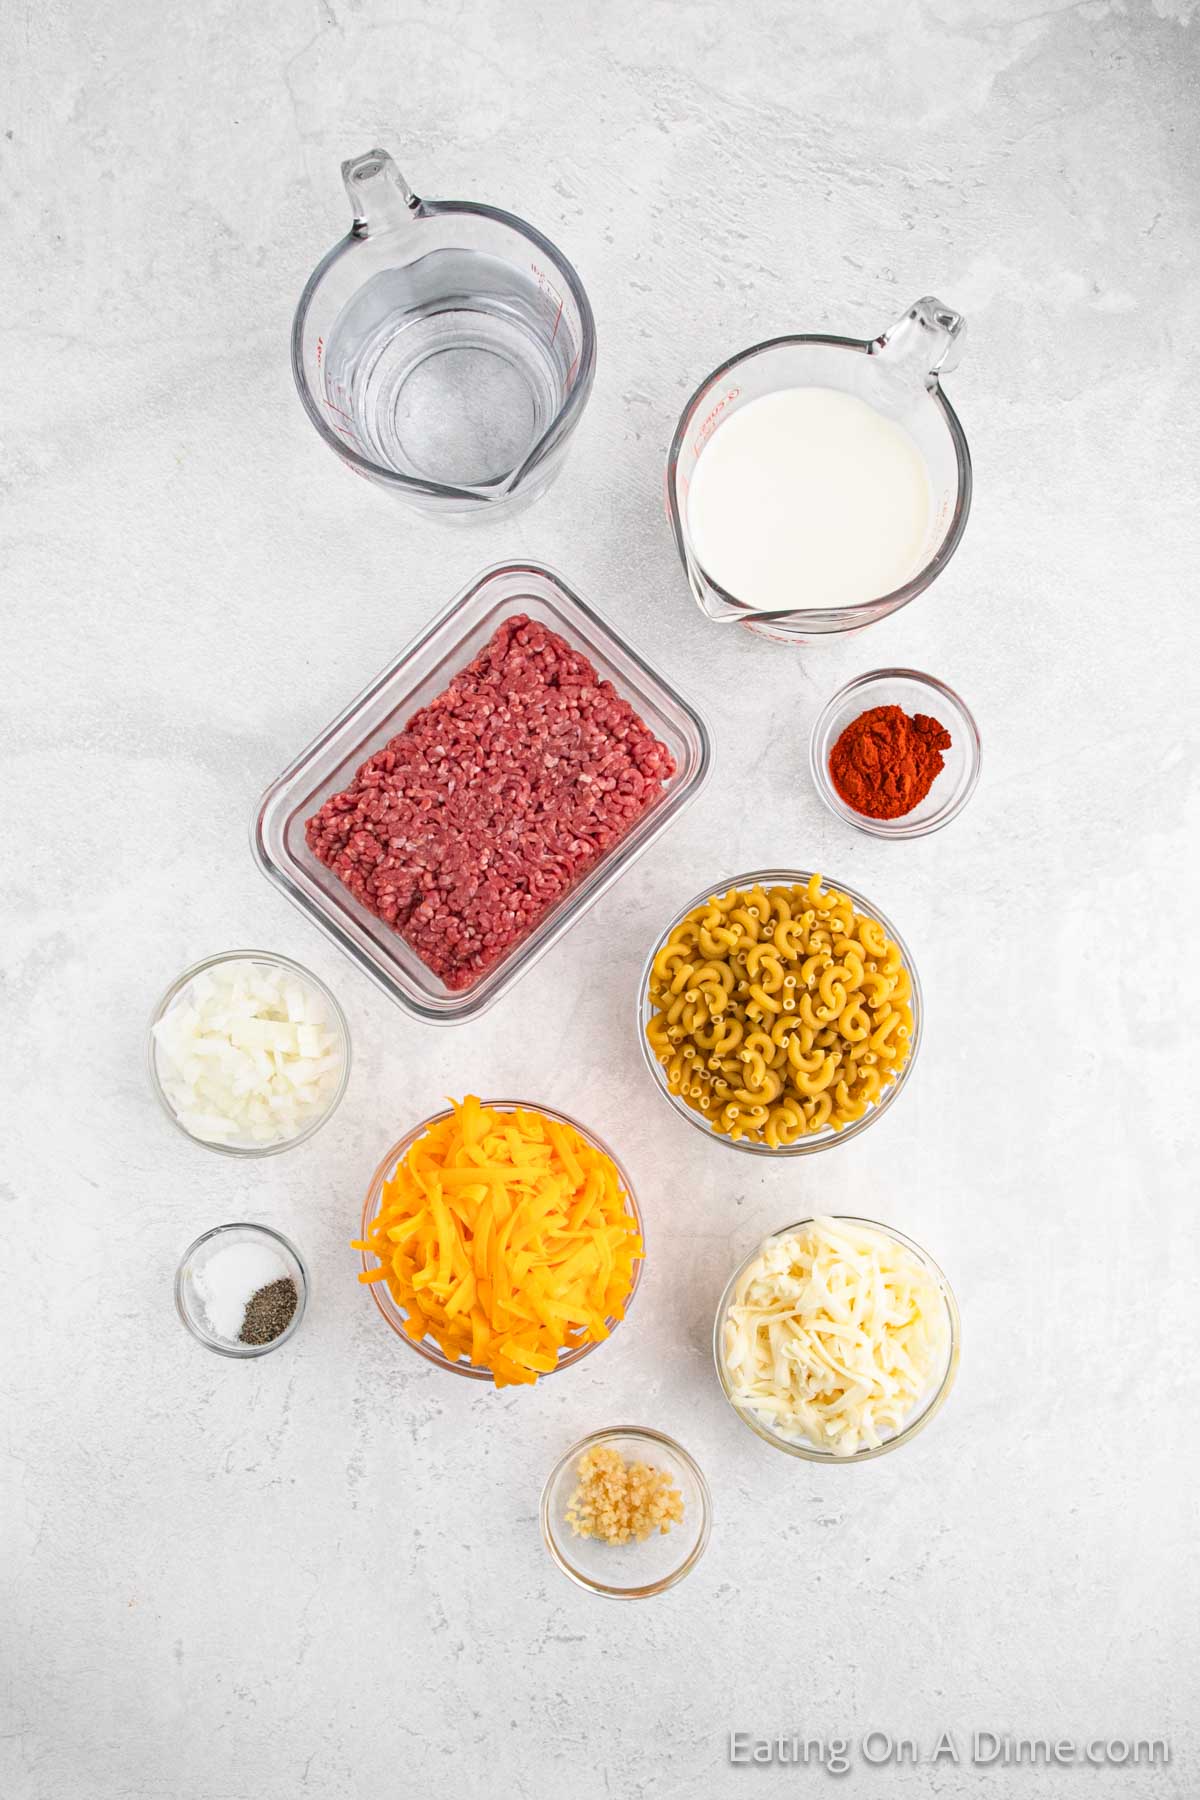 Top view of ingredients for a homemade cheeseburger helper recipe. Various bowls and measuring cups contain elbow macaroni, ground beef, shredded cheese, milk, water, chopped onion, minced garlic, and seasonings, all arranged on a light surface.